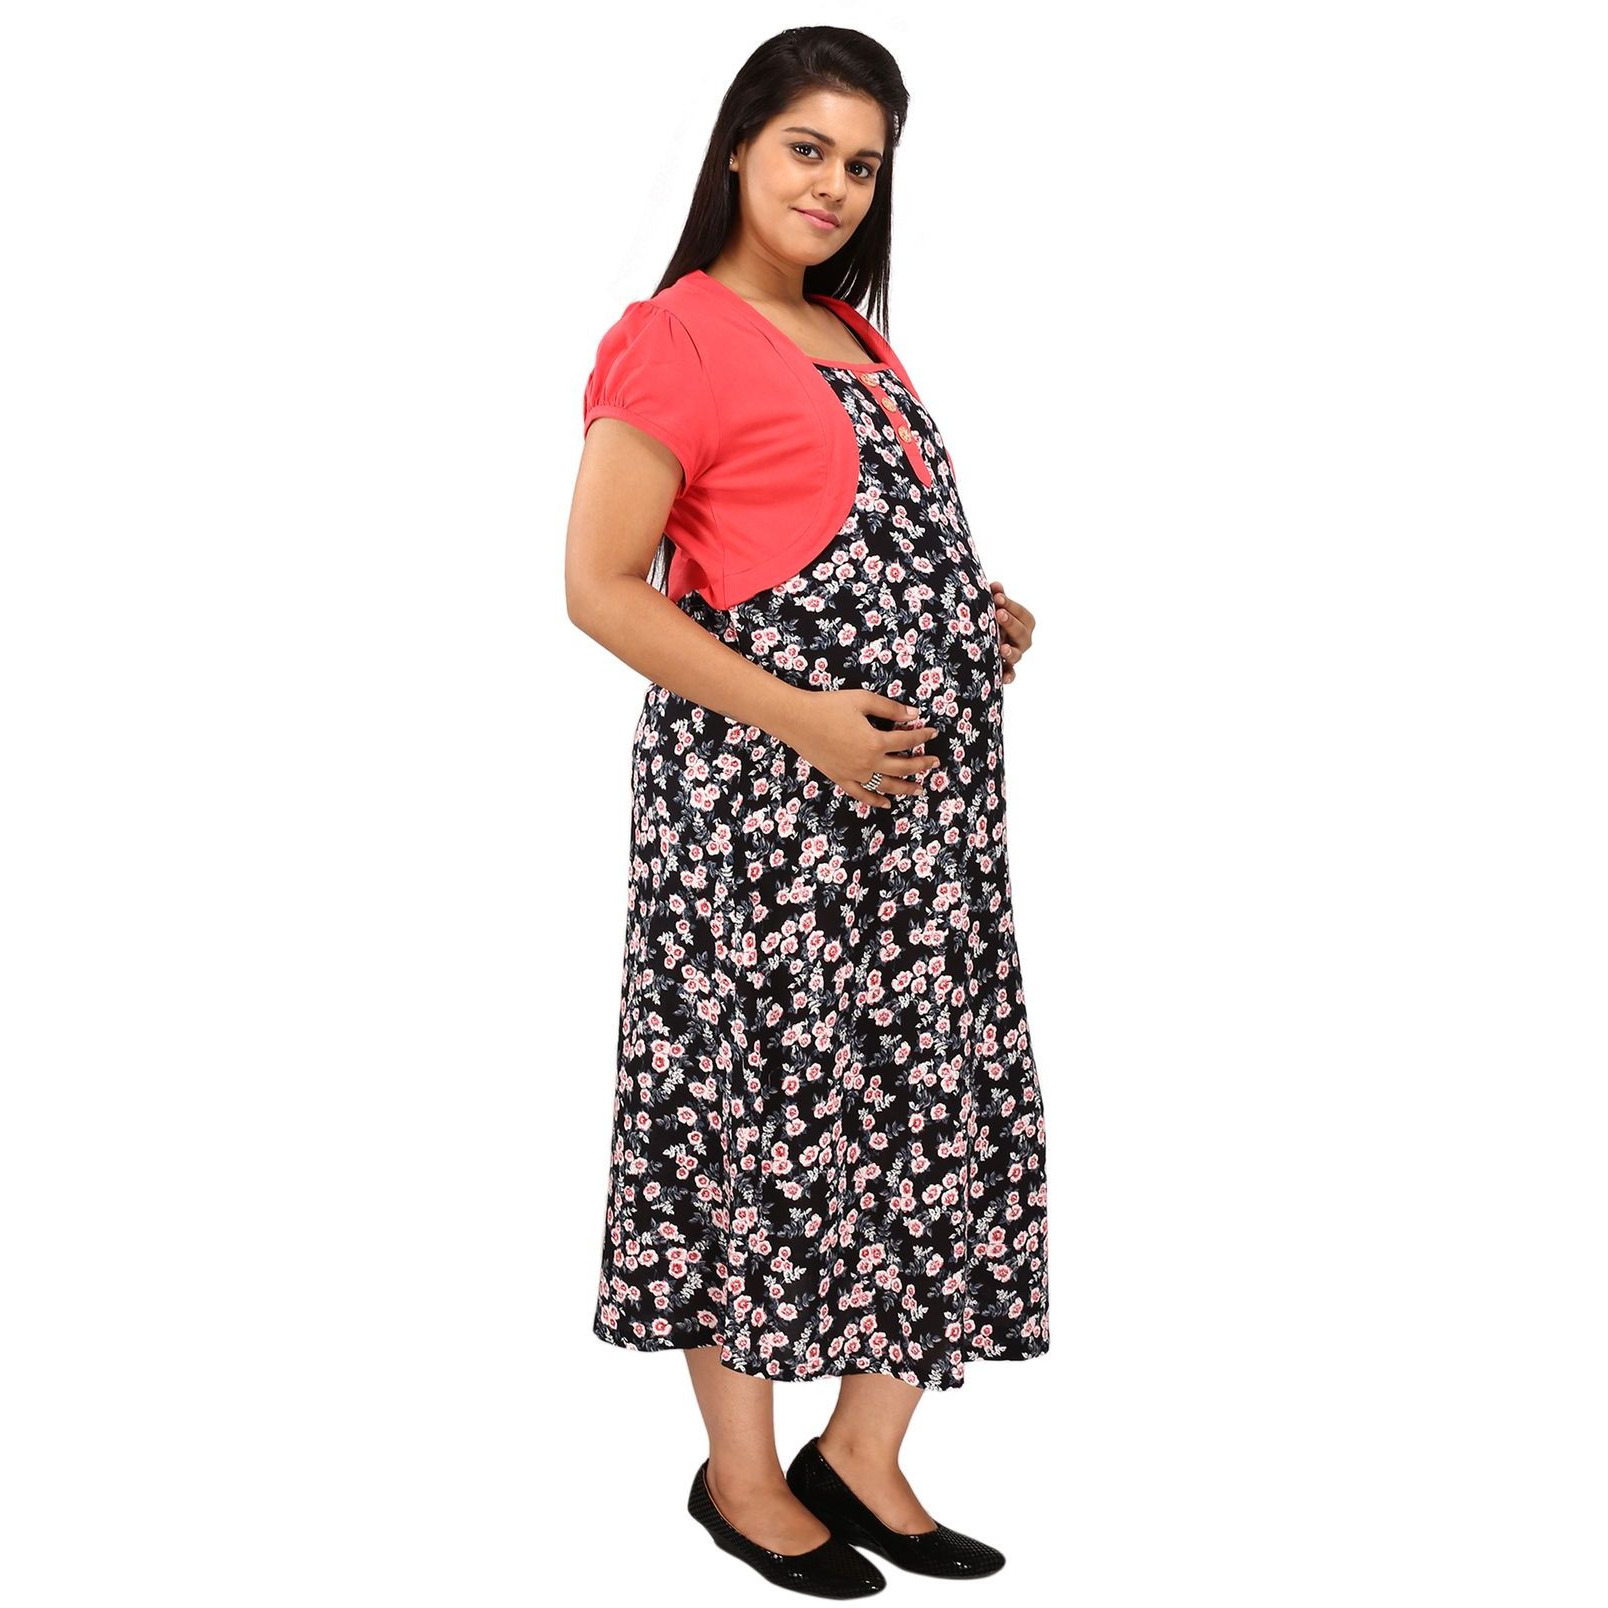 Mamma's Maternity Women's Peach and Black Floral Maternity Dress